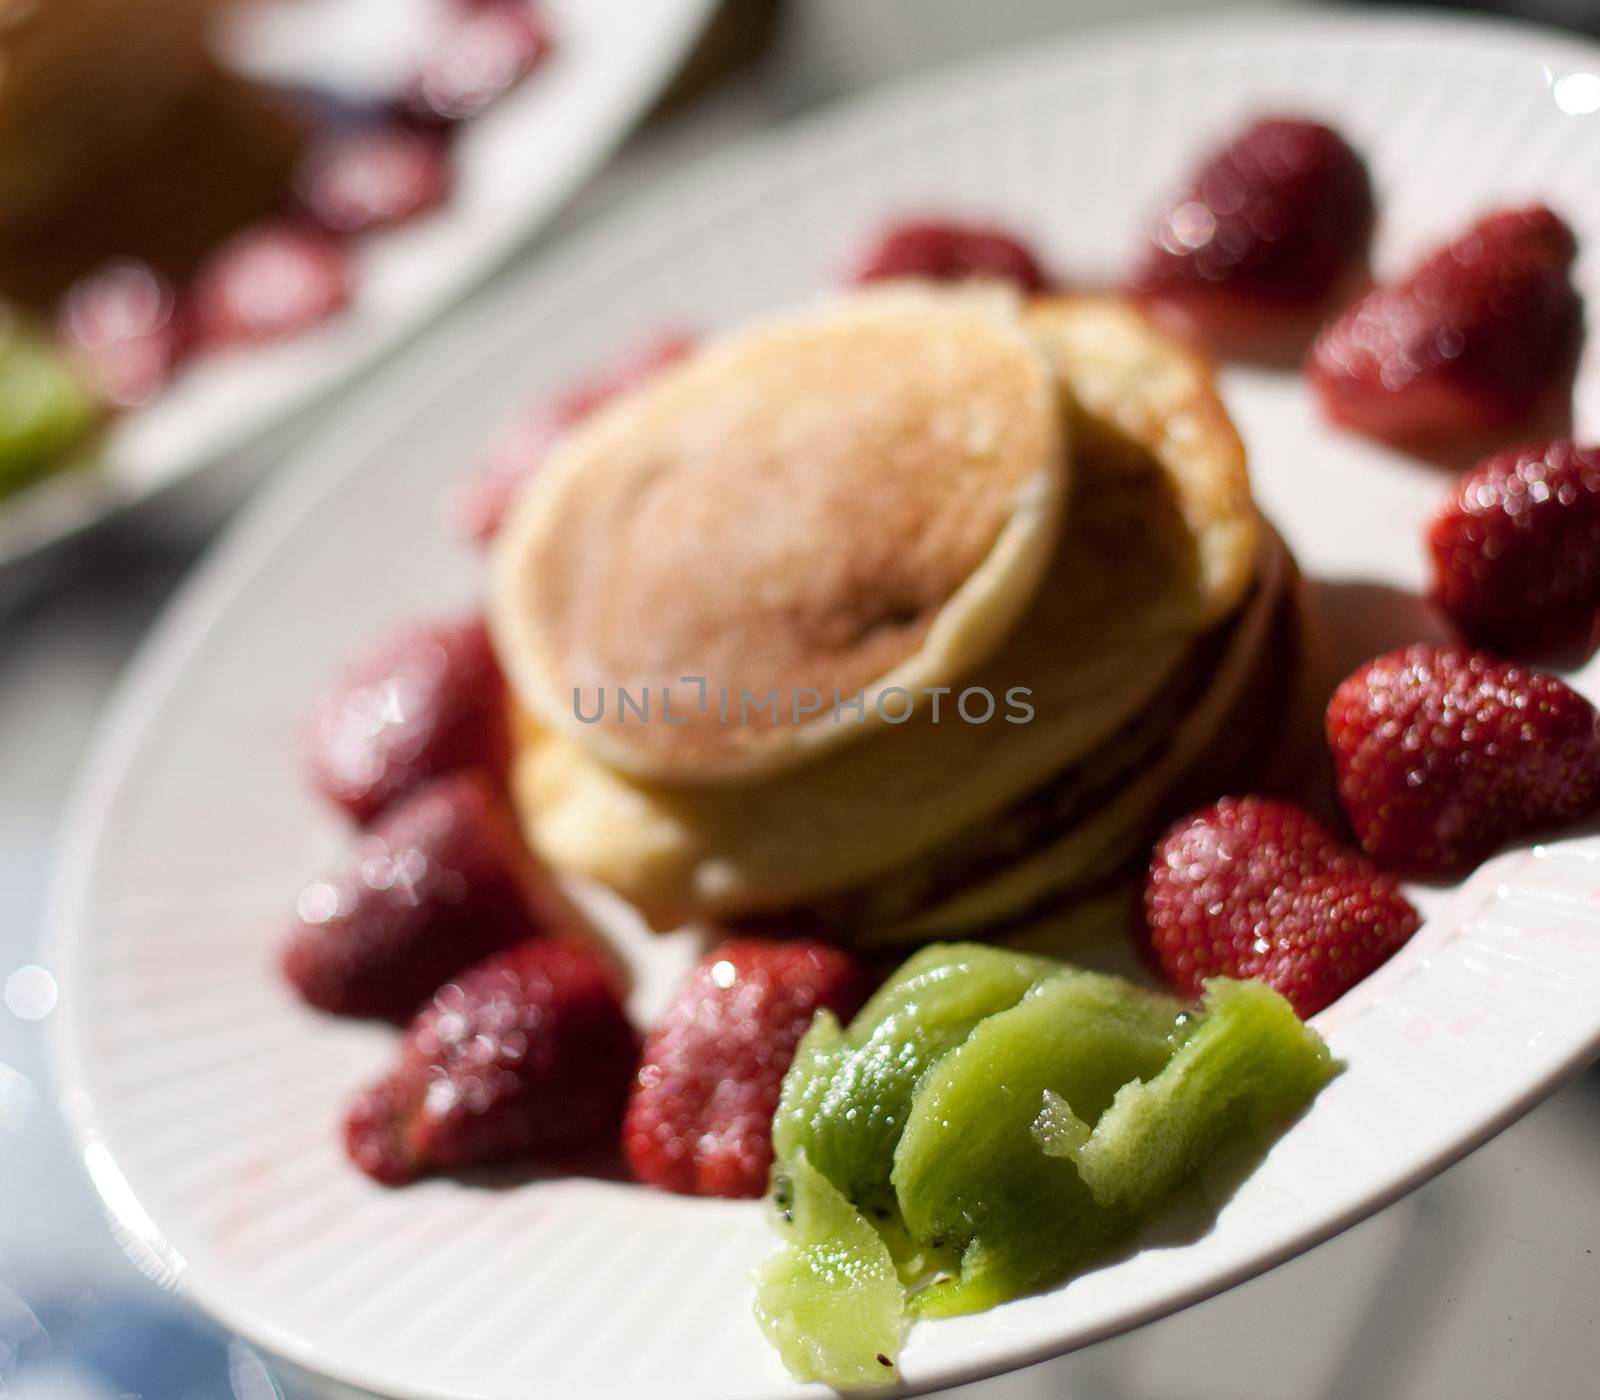 Pancakes with strawberries and kiwis prepared for breakfast